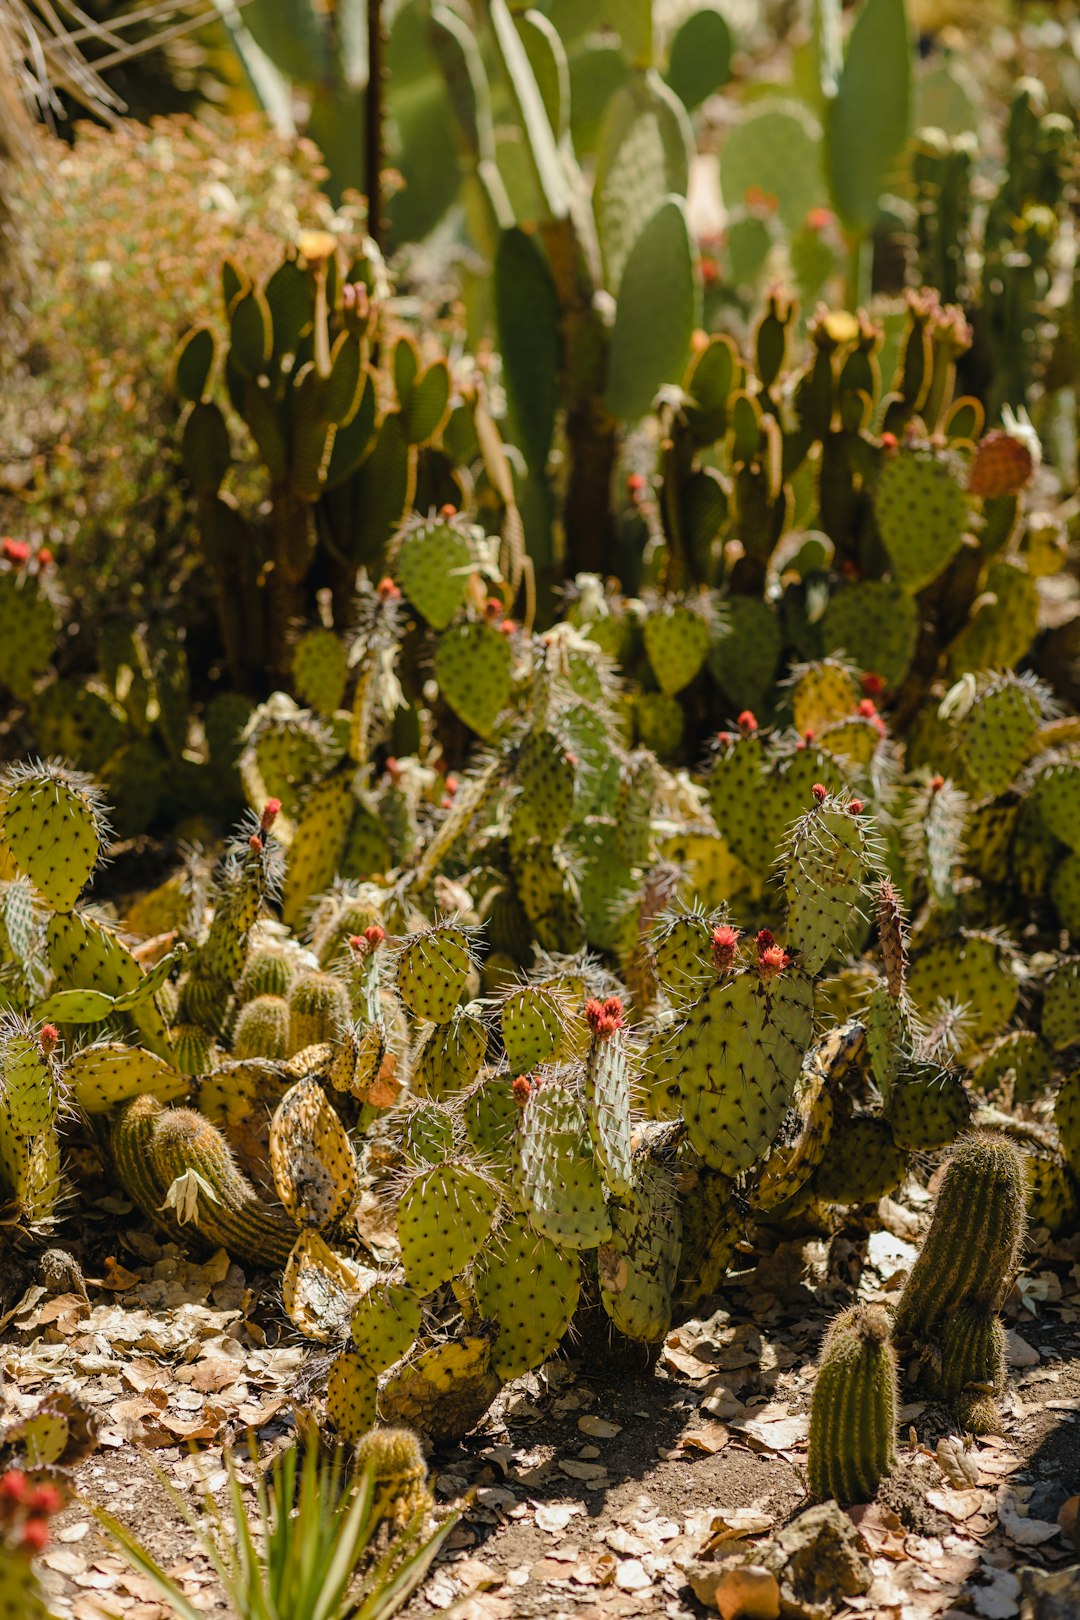 green cactus plants during daytime